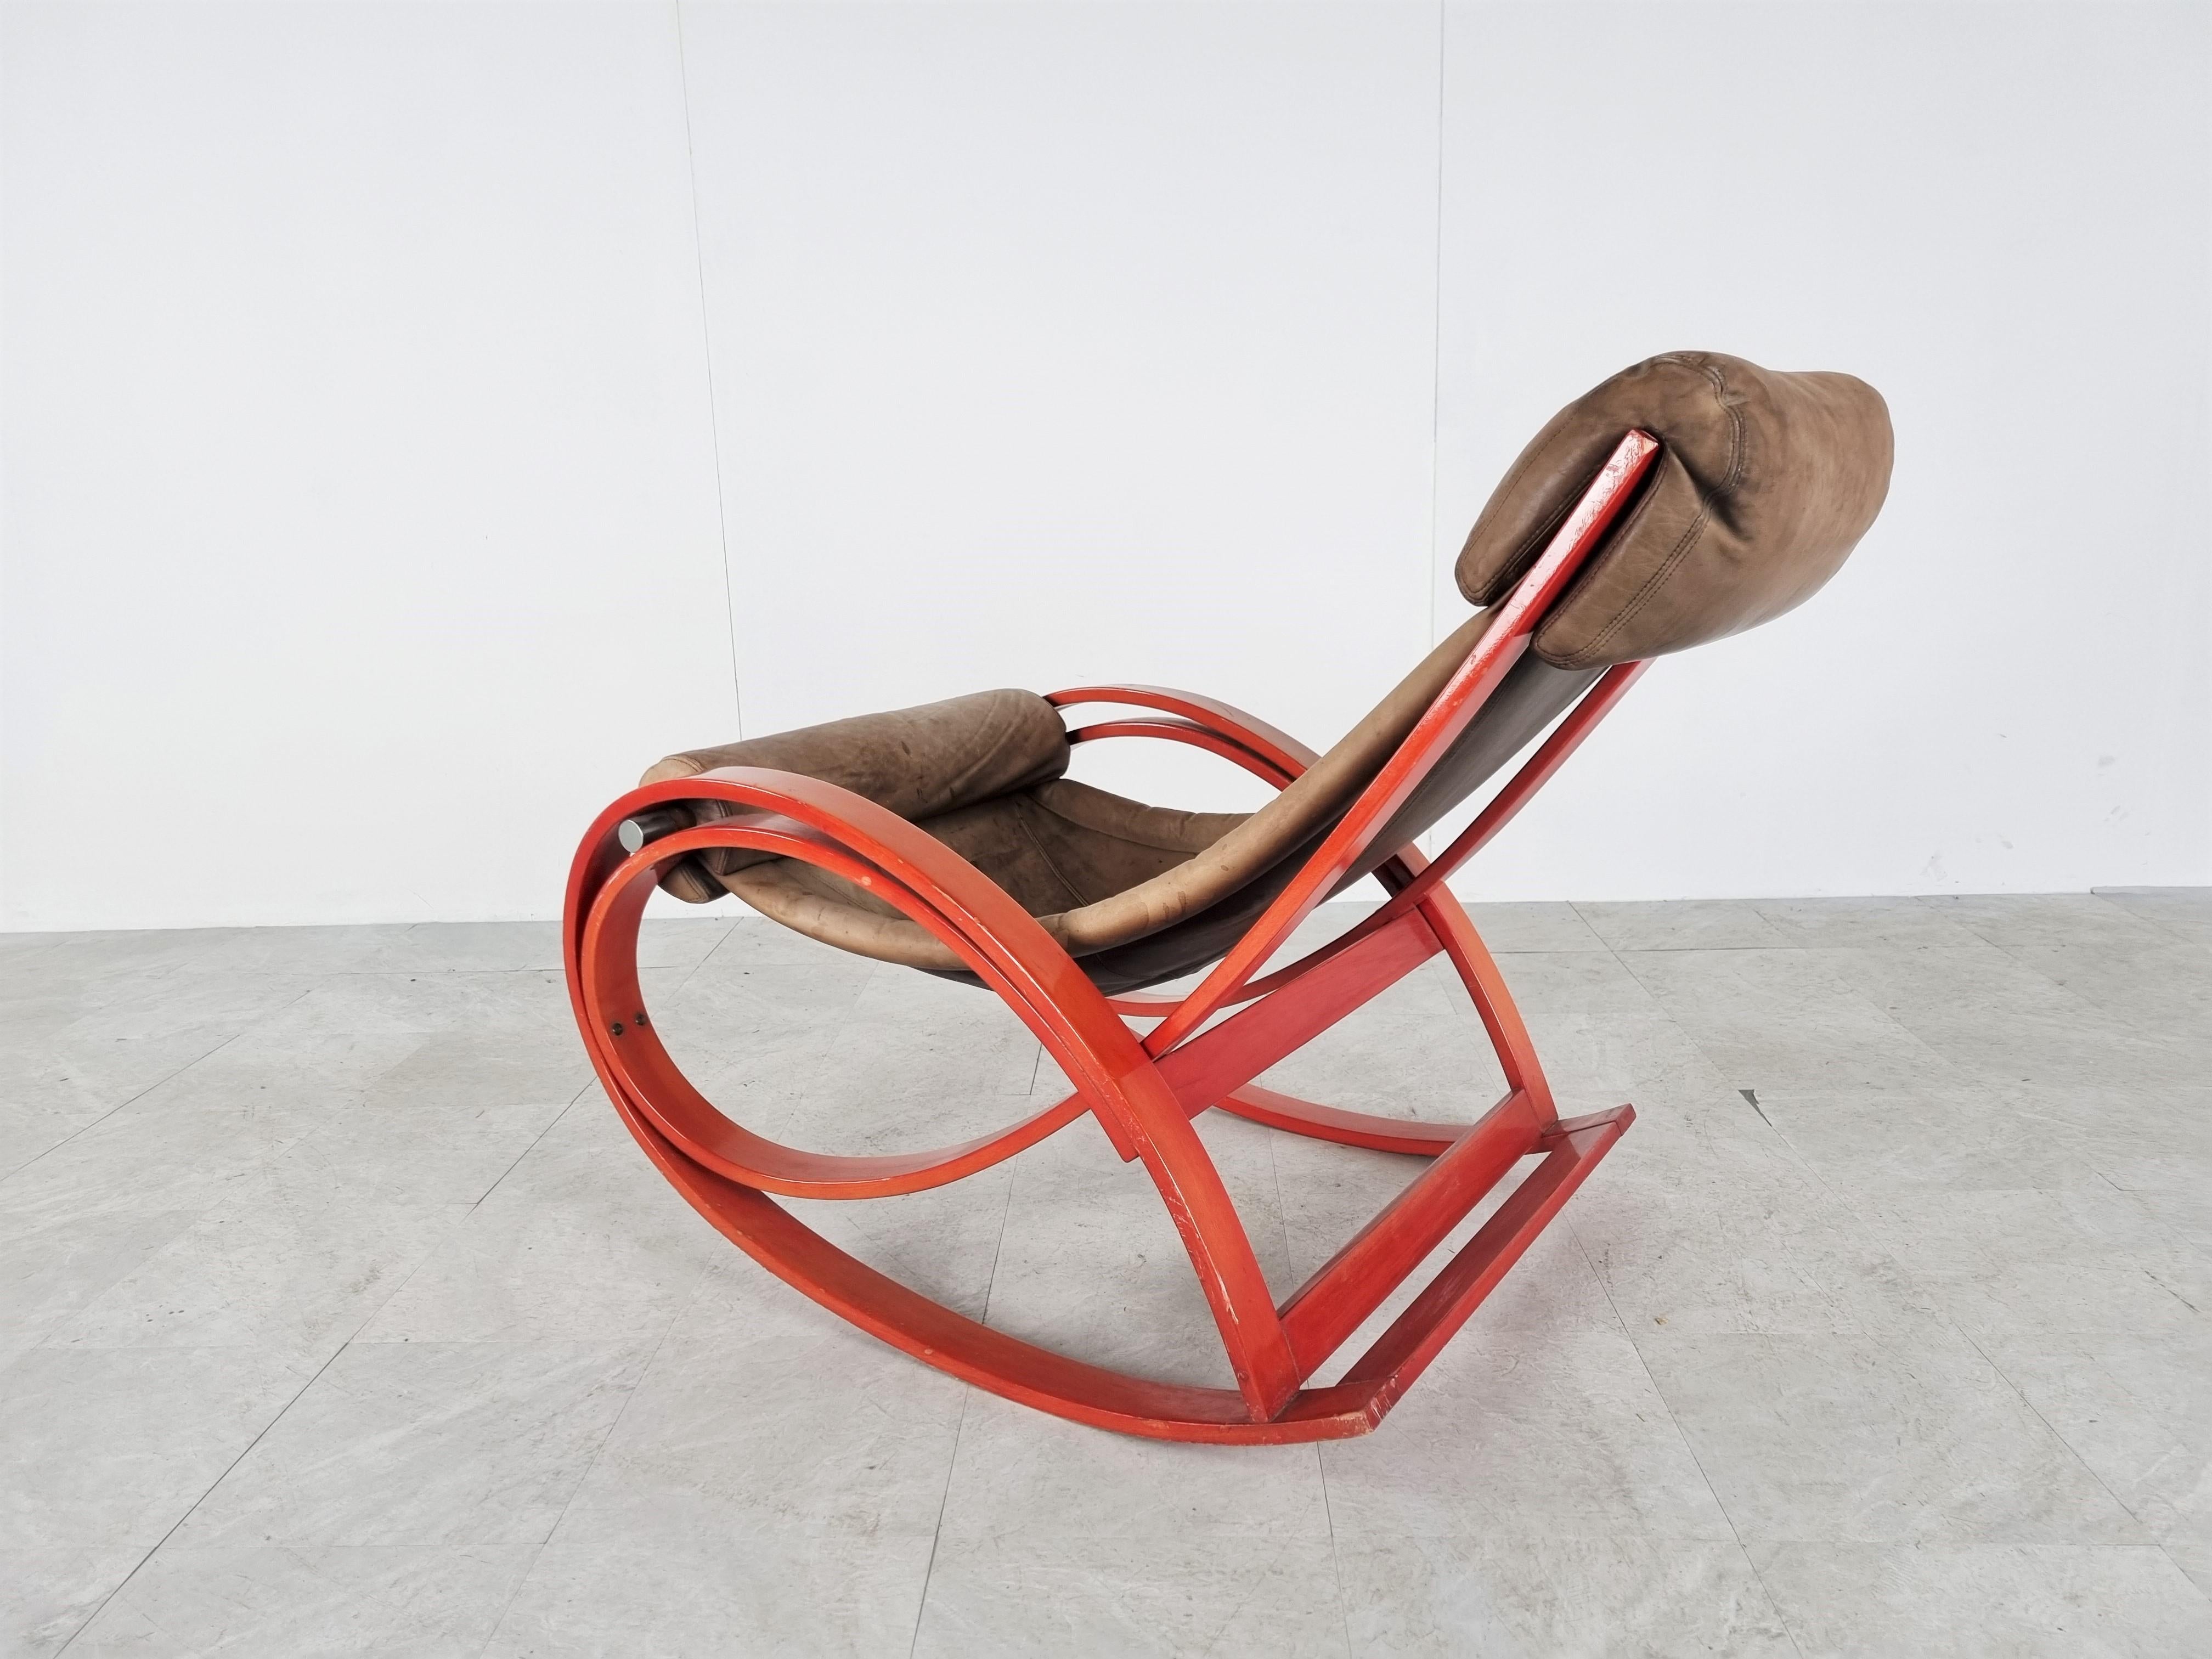 Leather Sgarsul Rocking Chair by Gae Aulenti for Poltronova, 1960s For Sale